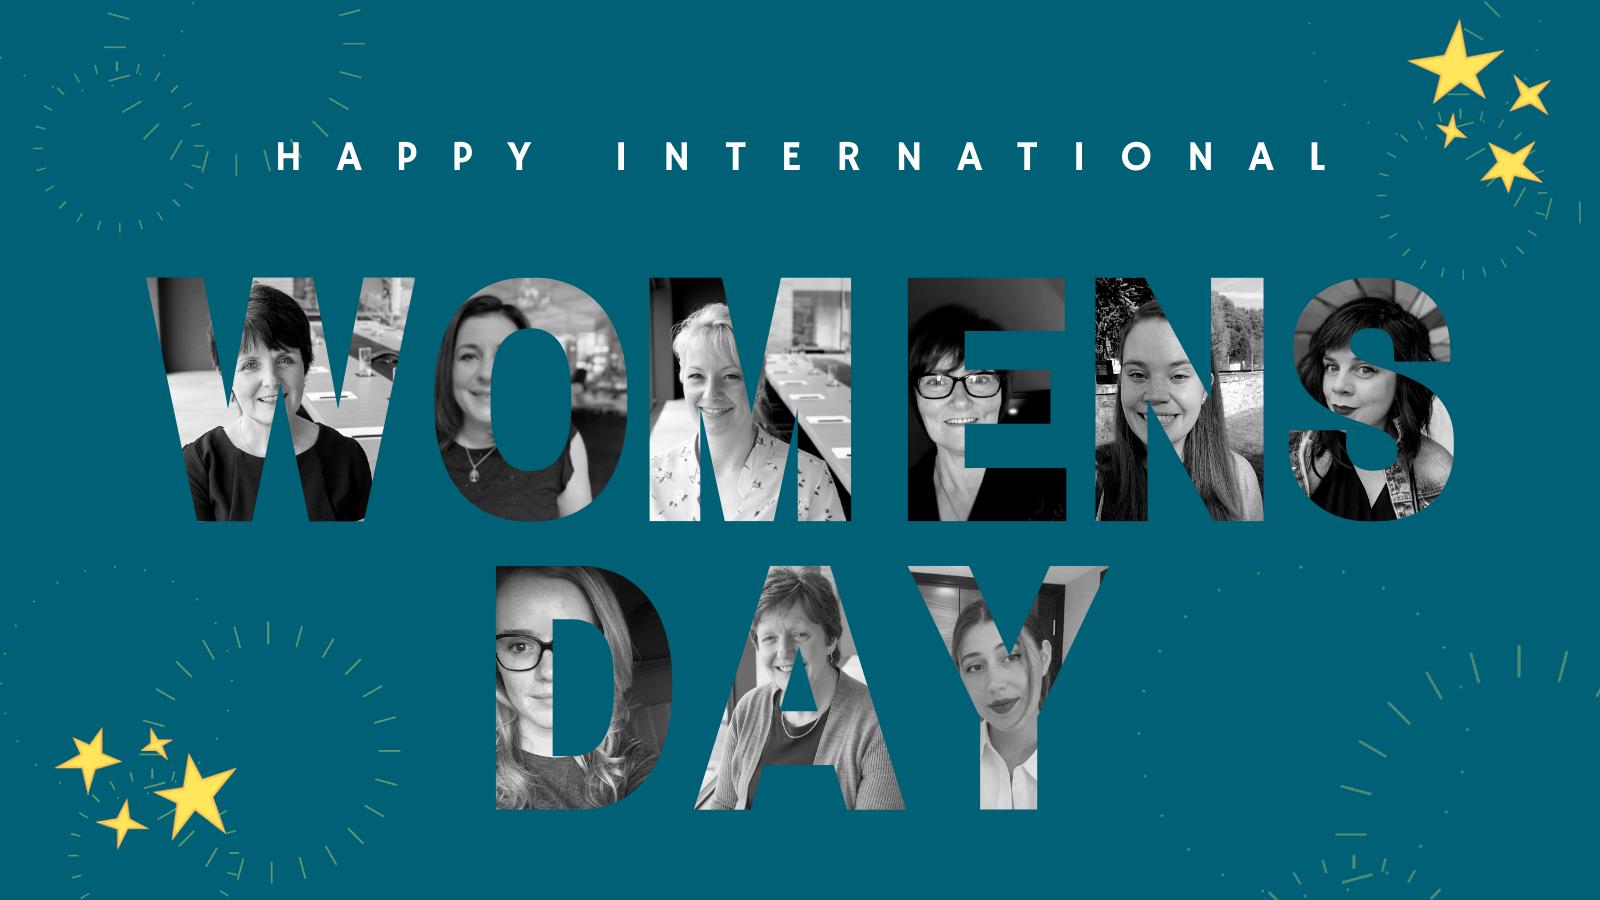 An image saying 'happy international womens day' with pictures of women in the text of 'womens day'